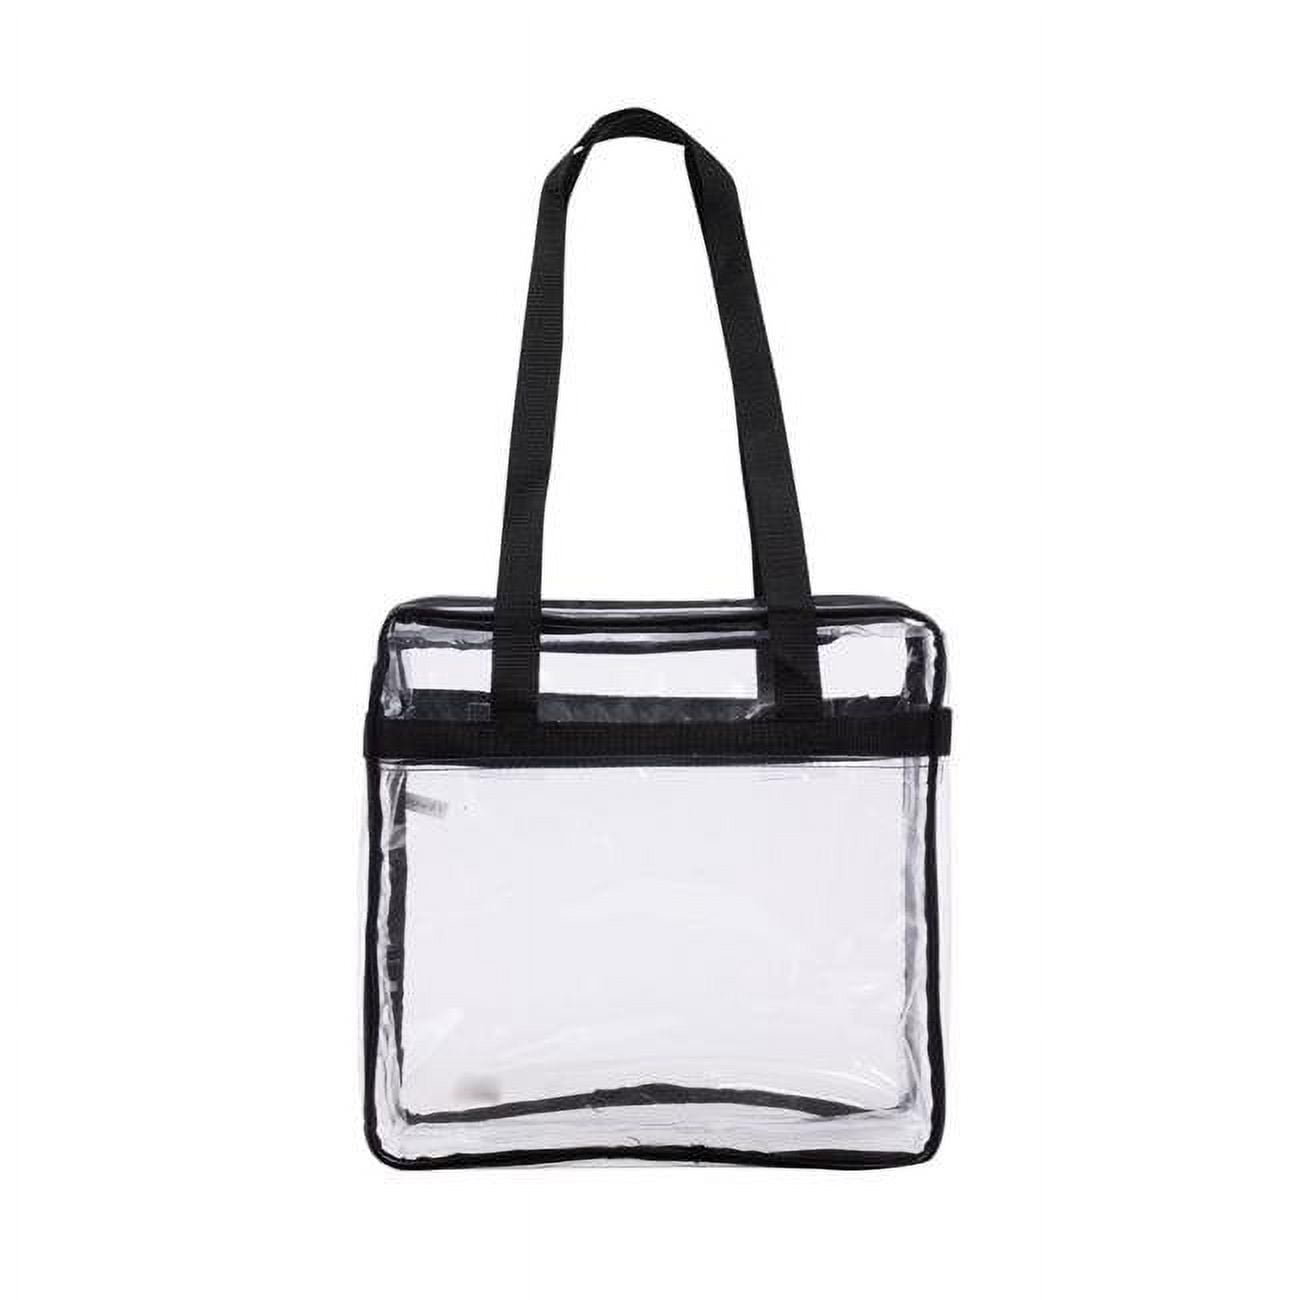 2318410 Nfl Approved Heavy Duty Clear Stadium Tote, Assorted Color - Case Of 24 - 24 Per Pack